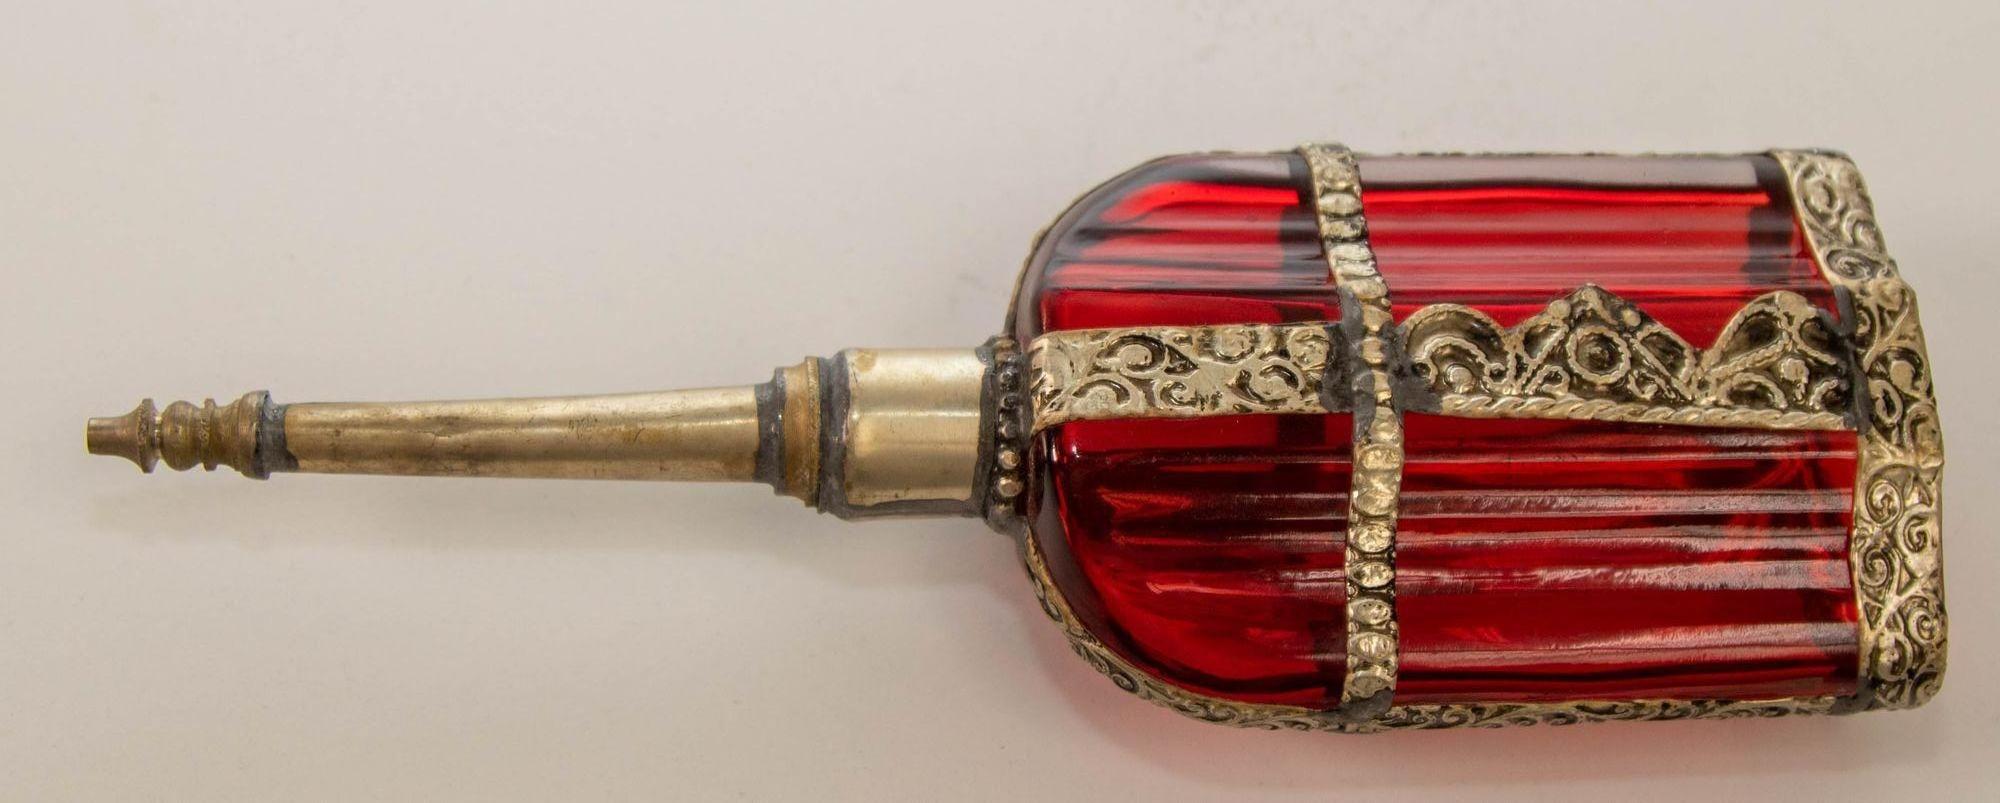 20th Century Moroccan Perfume Bottle Sprinkler with Embossed Metal Overlay and Red Glass